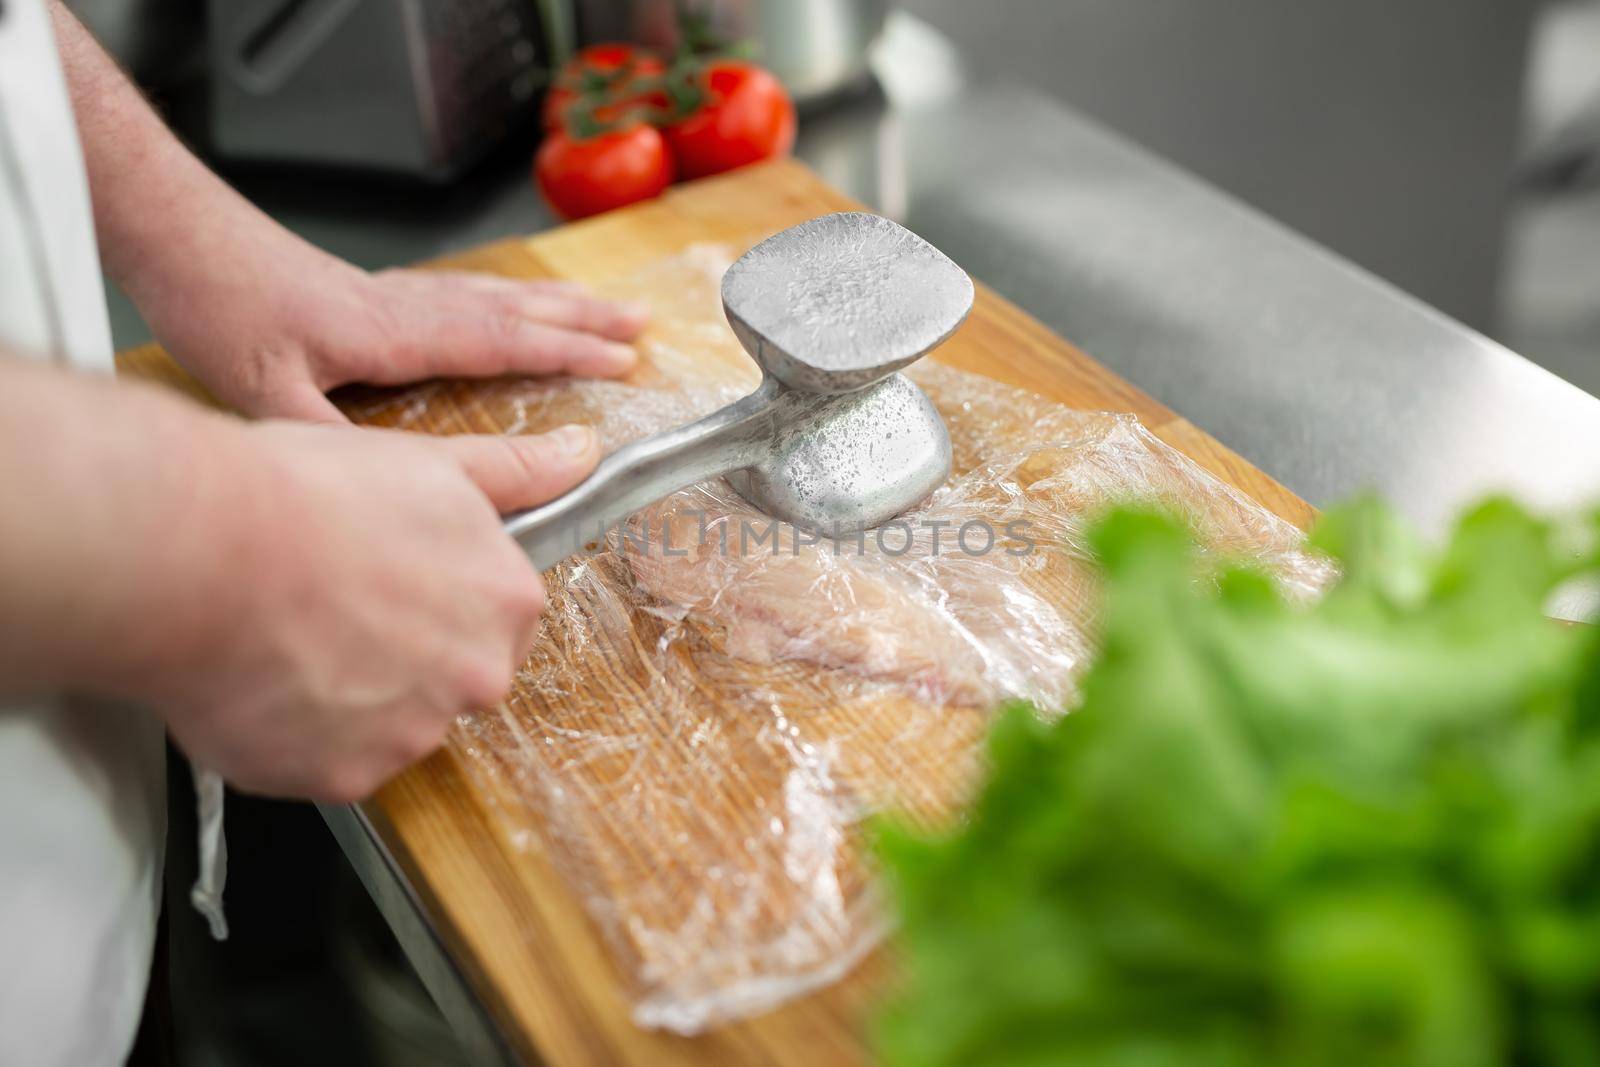 Cook beating a chicken breast with a hammer, close-up. Diet, healthy low-calorie food, weight loss concept